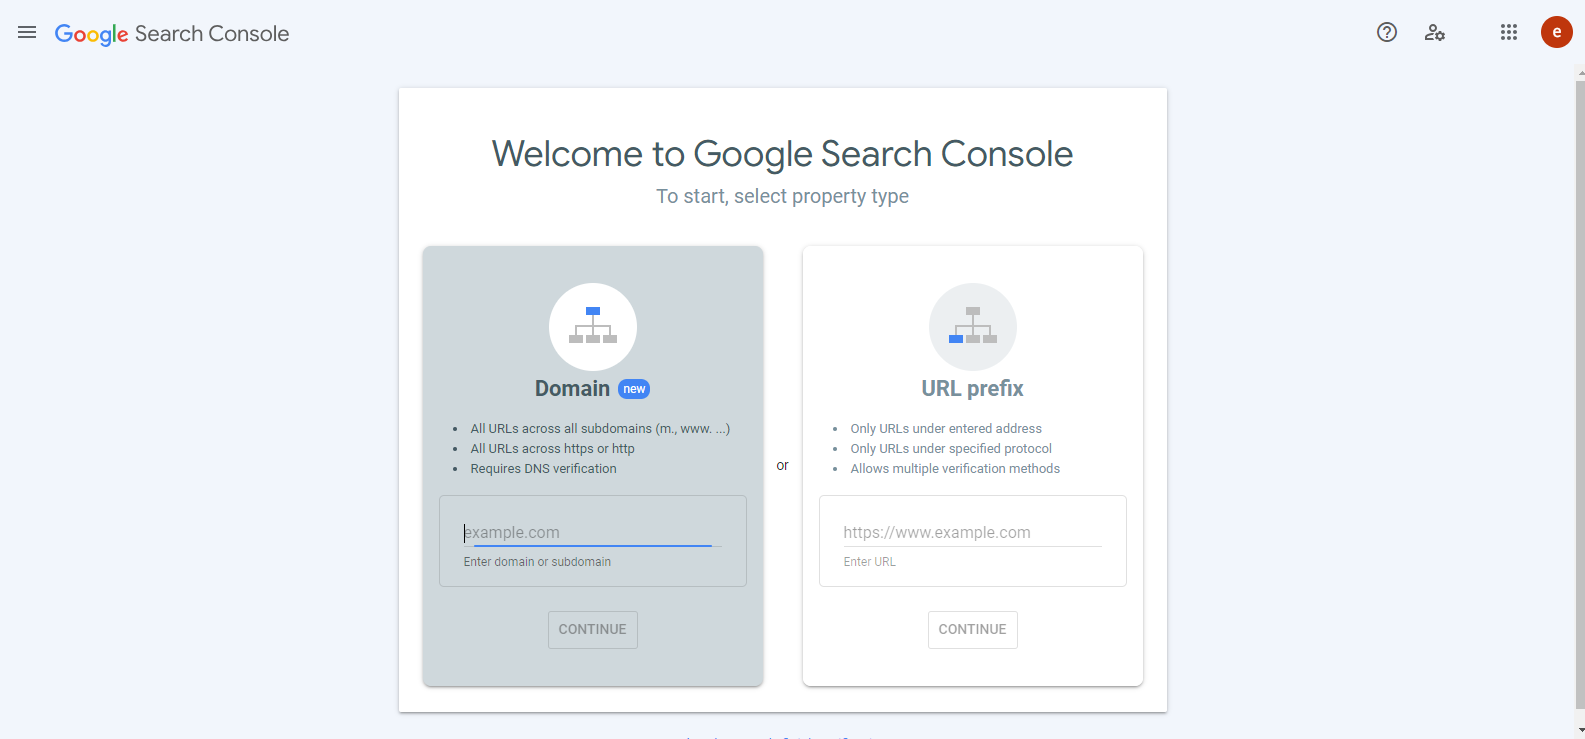 Getting Started With Google Search Console
